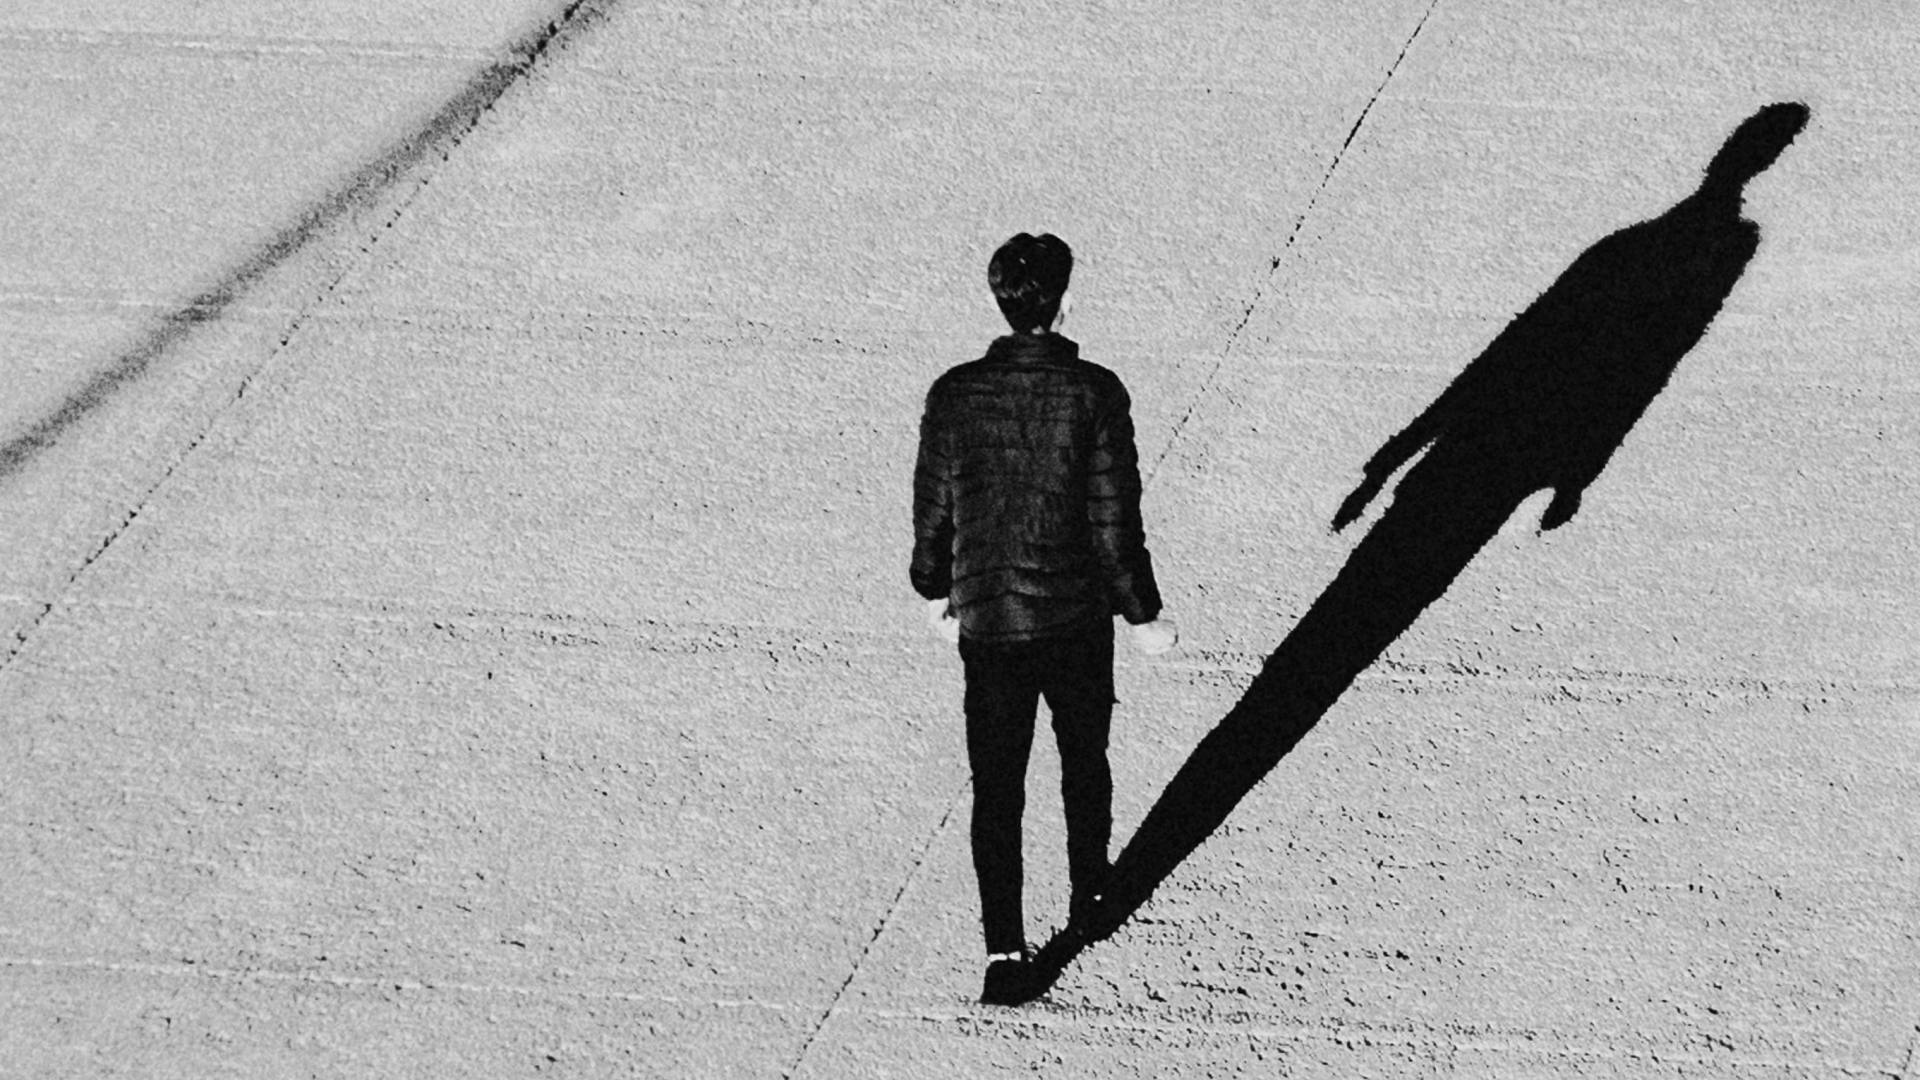 Photograph of a man walking, casting a shadow